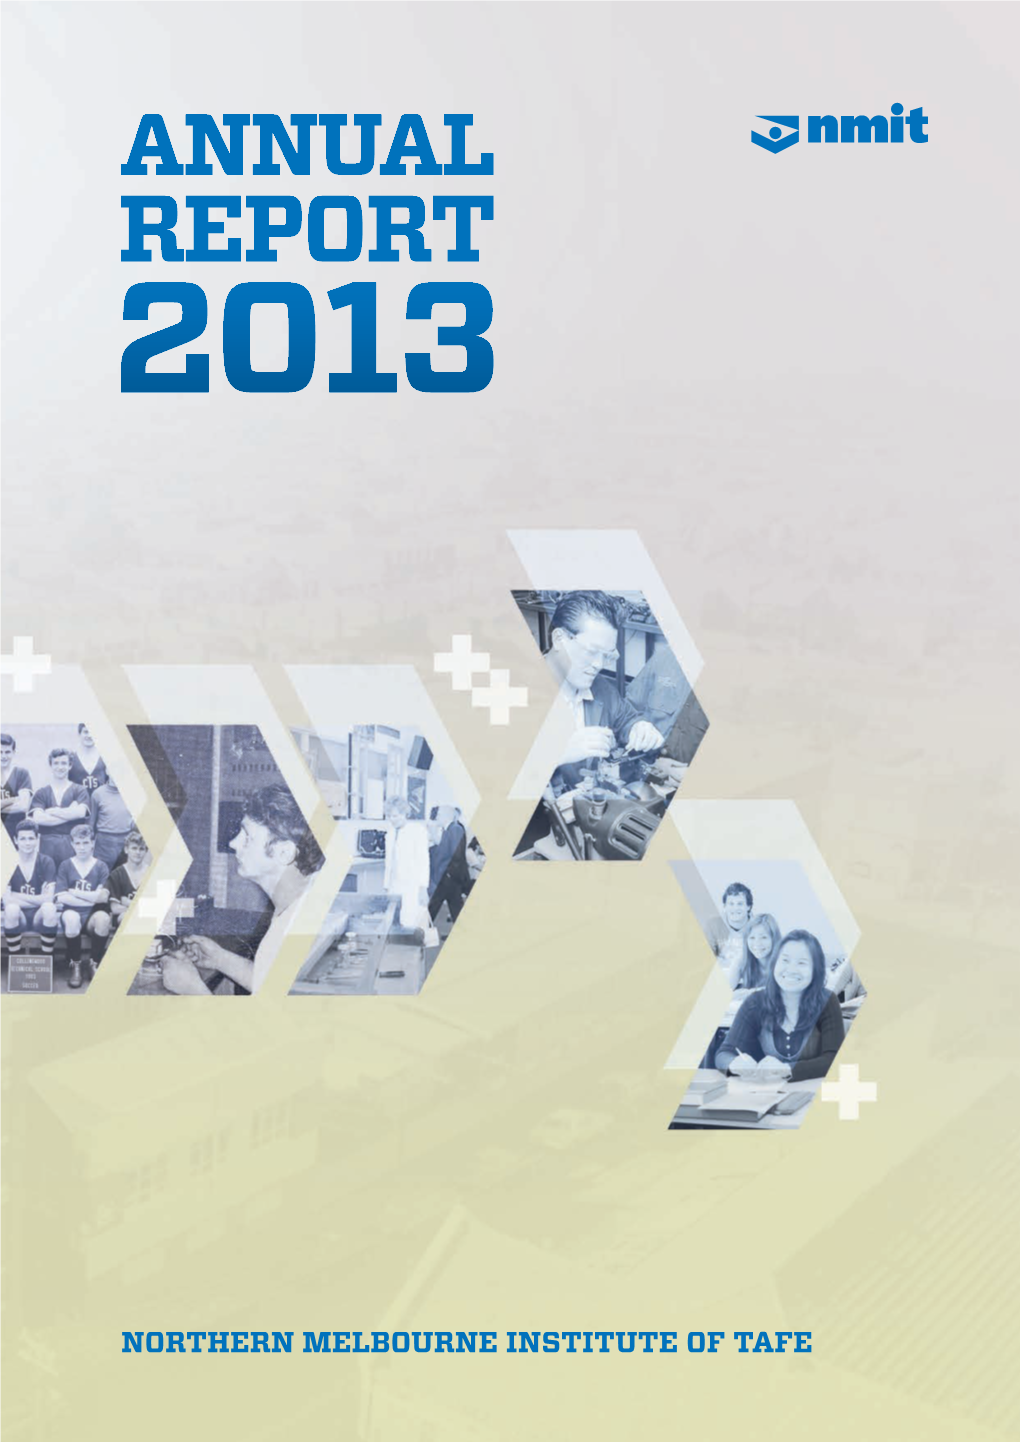 Northern Melbourne Institute of TAFE Annual Report 2013